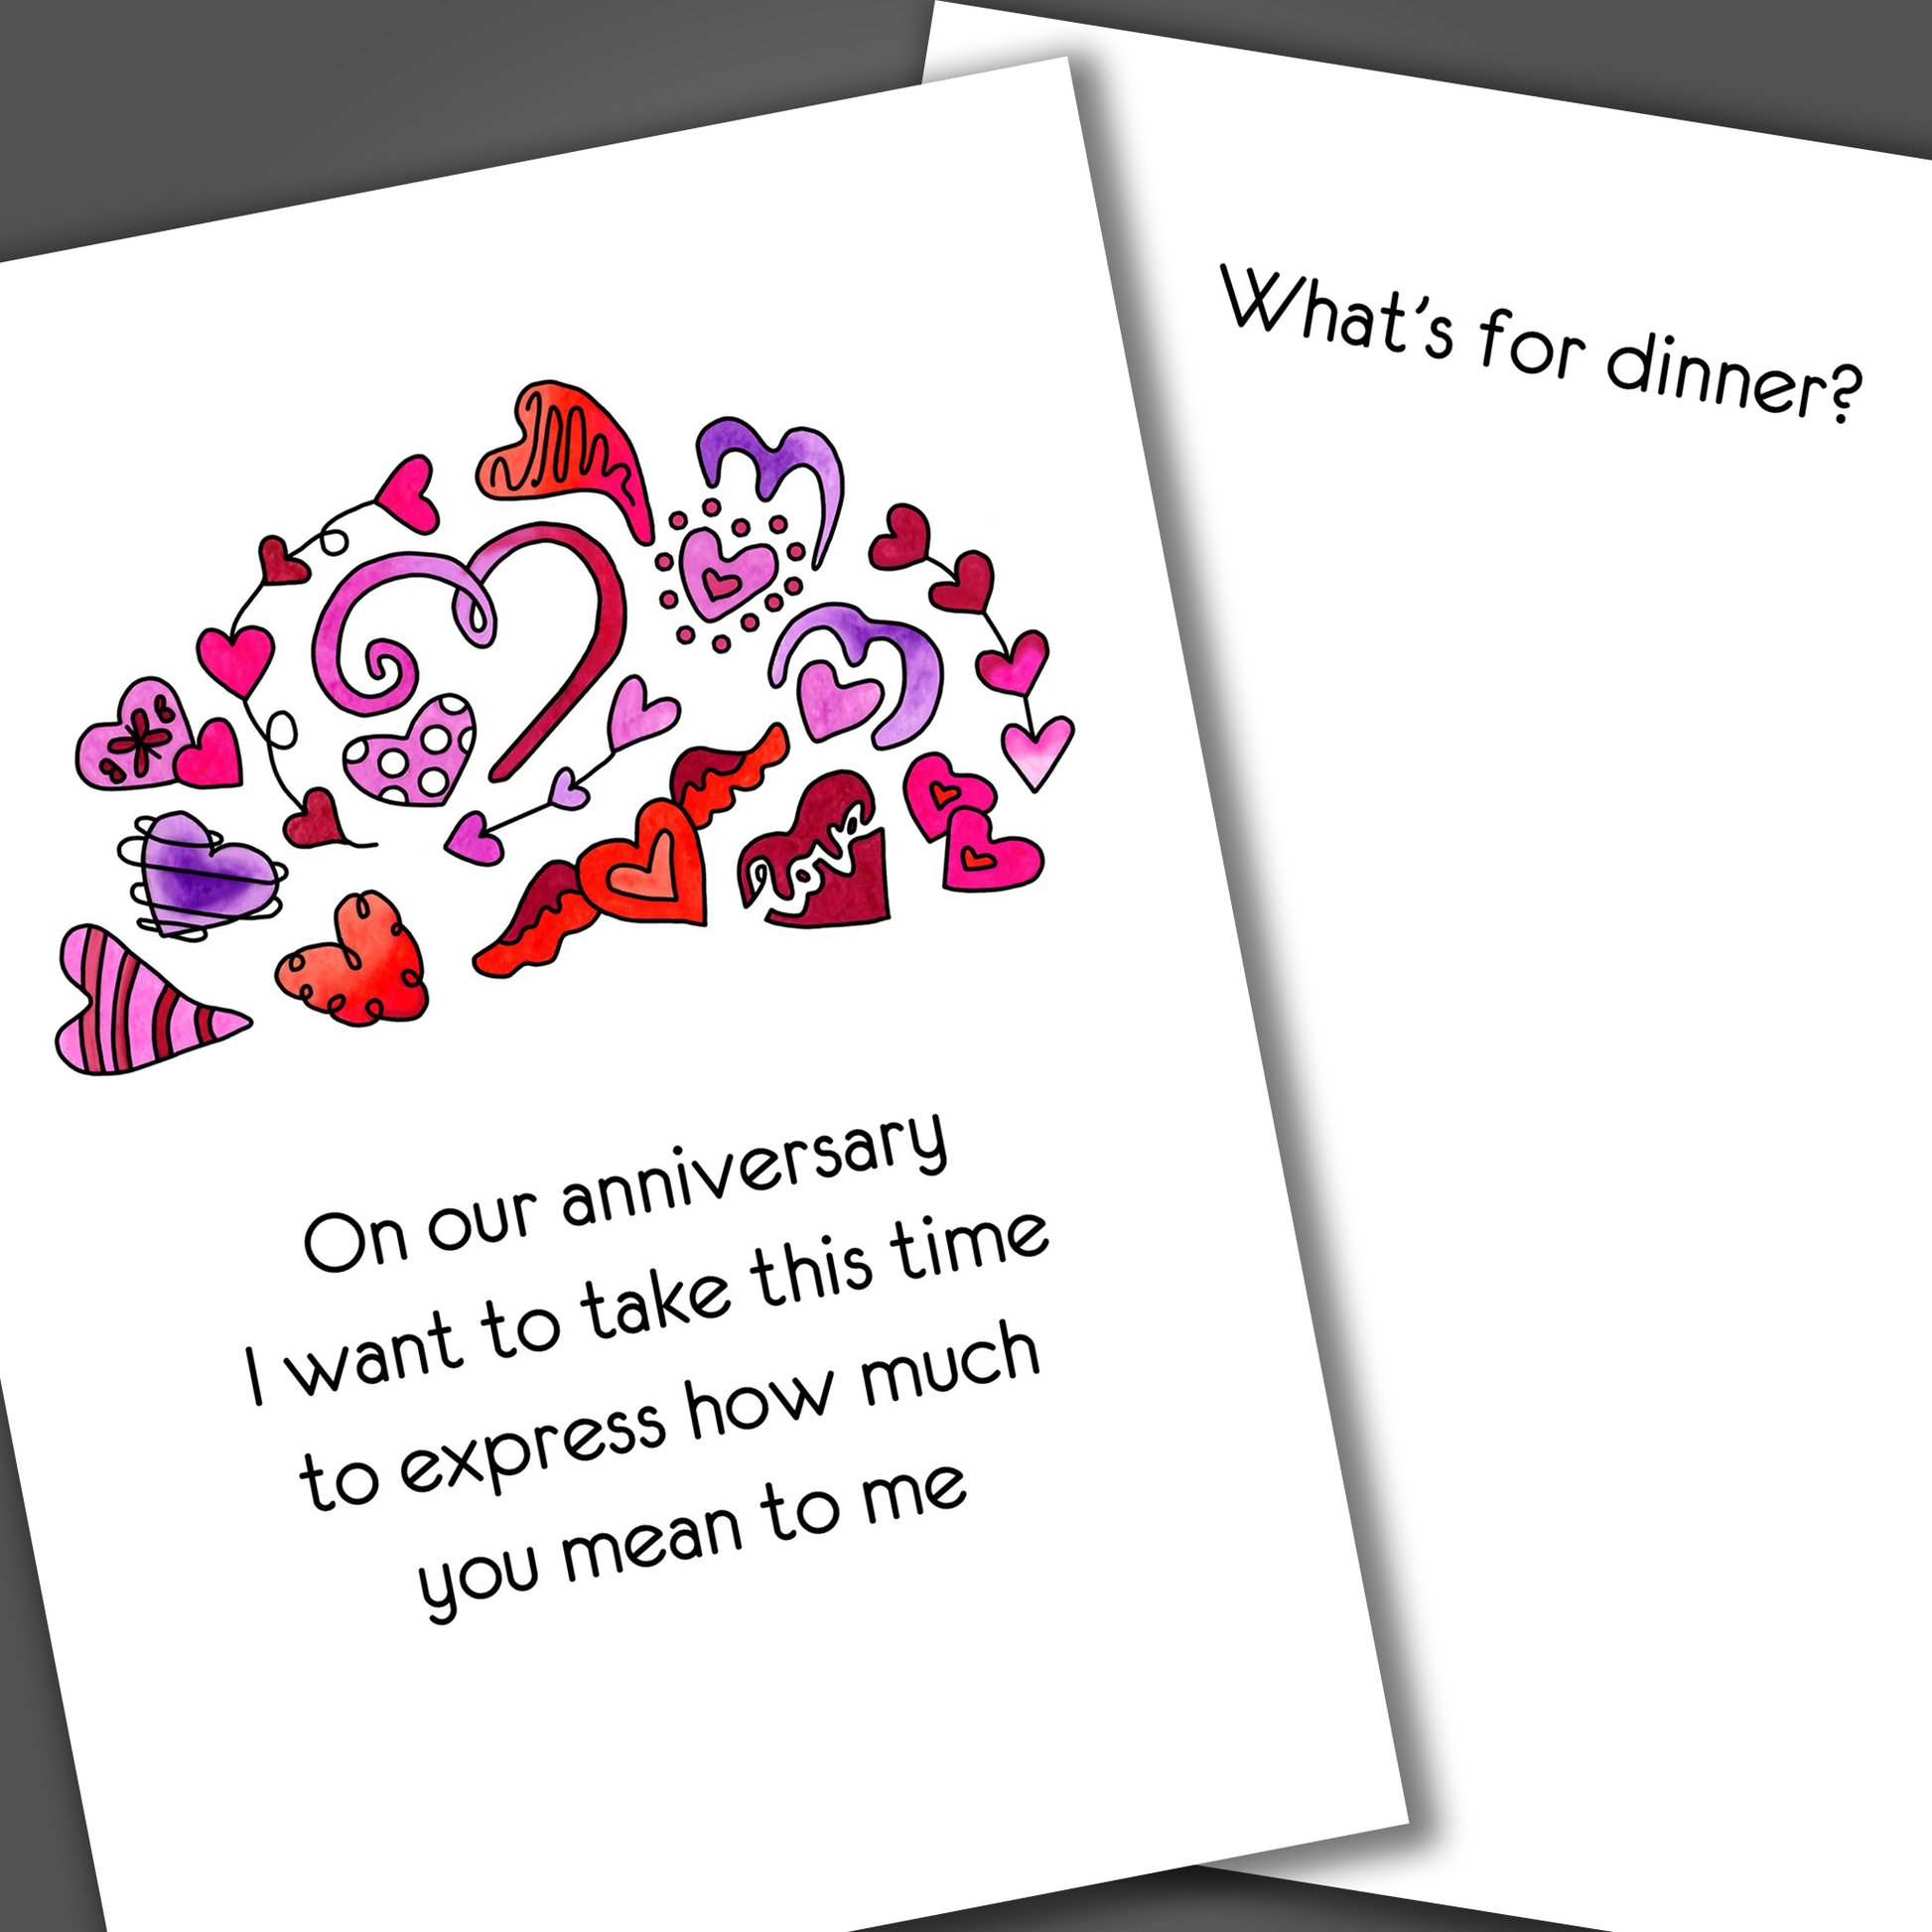 Funny anniversary card with pink and red hearts on front of card and a funny joke inside of card that says what's for dinner?